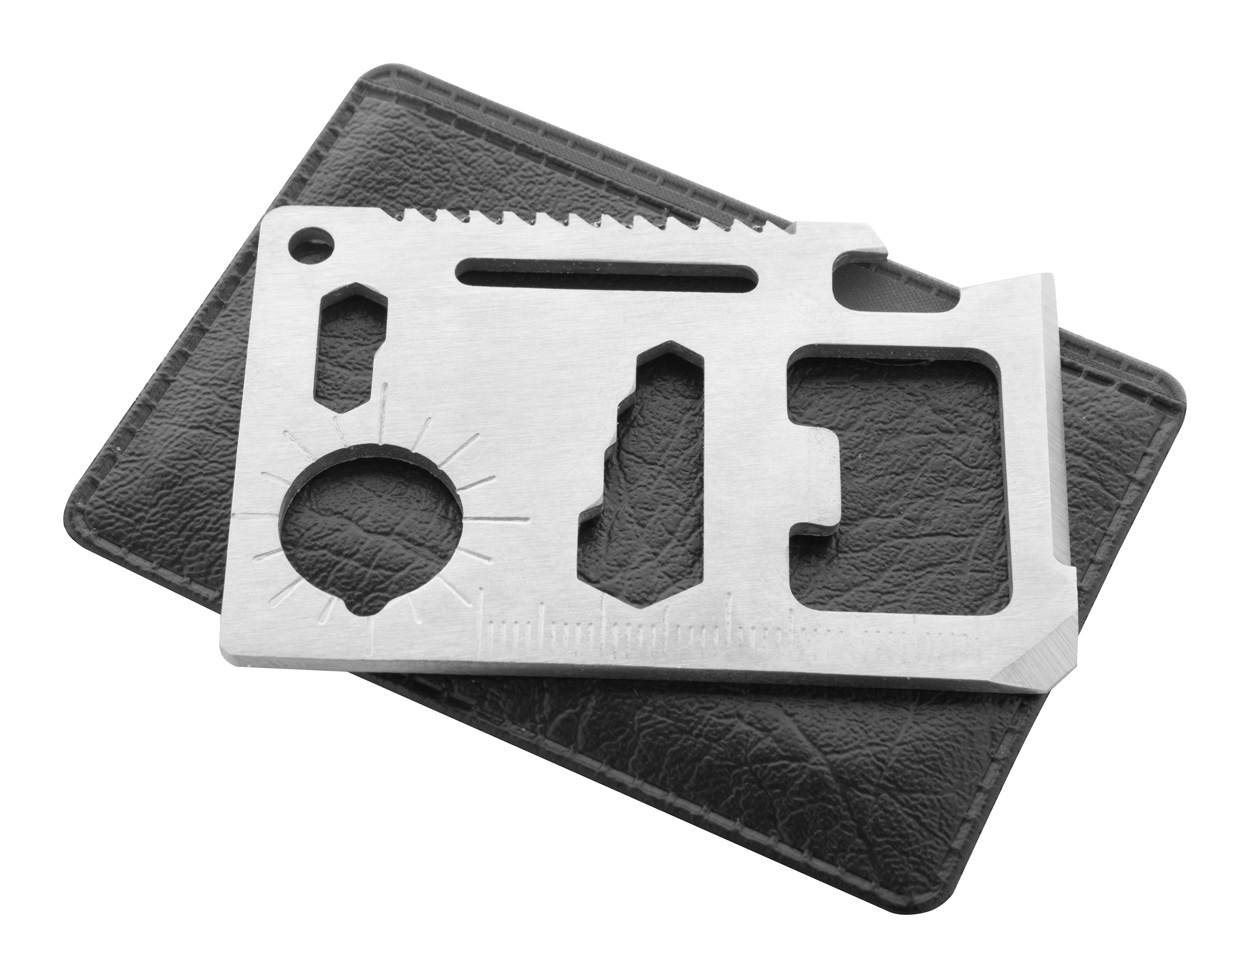 Multifunctional tool GYVER in the shape of a credit card - silver